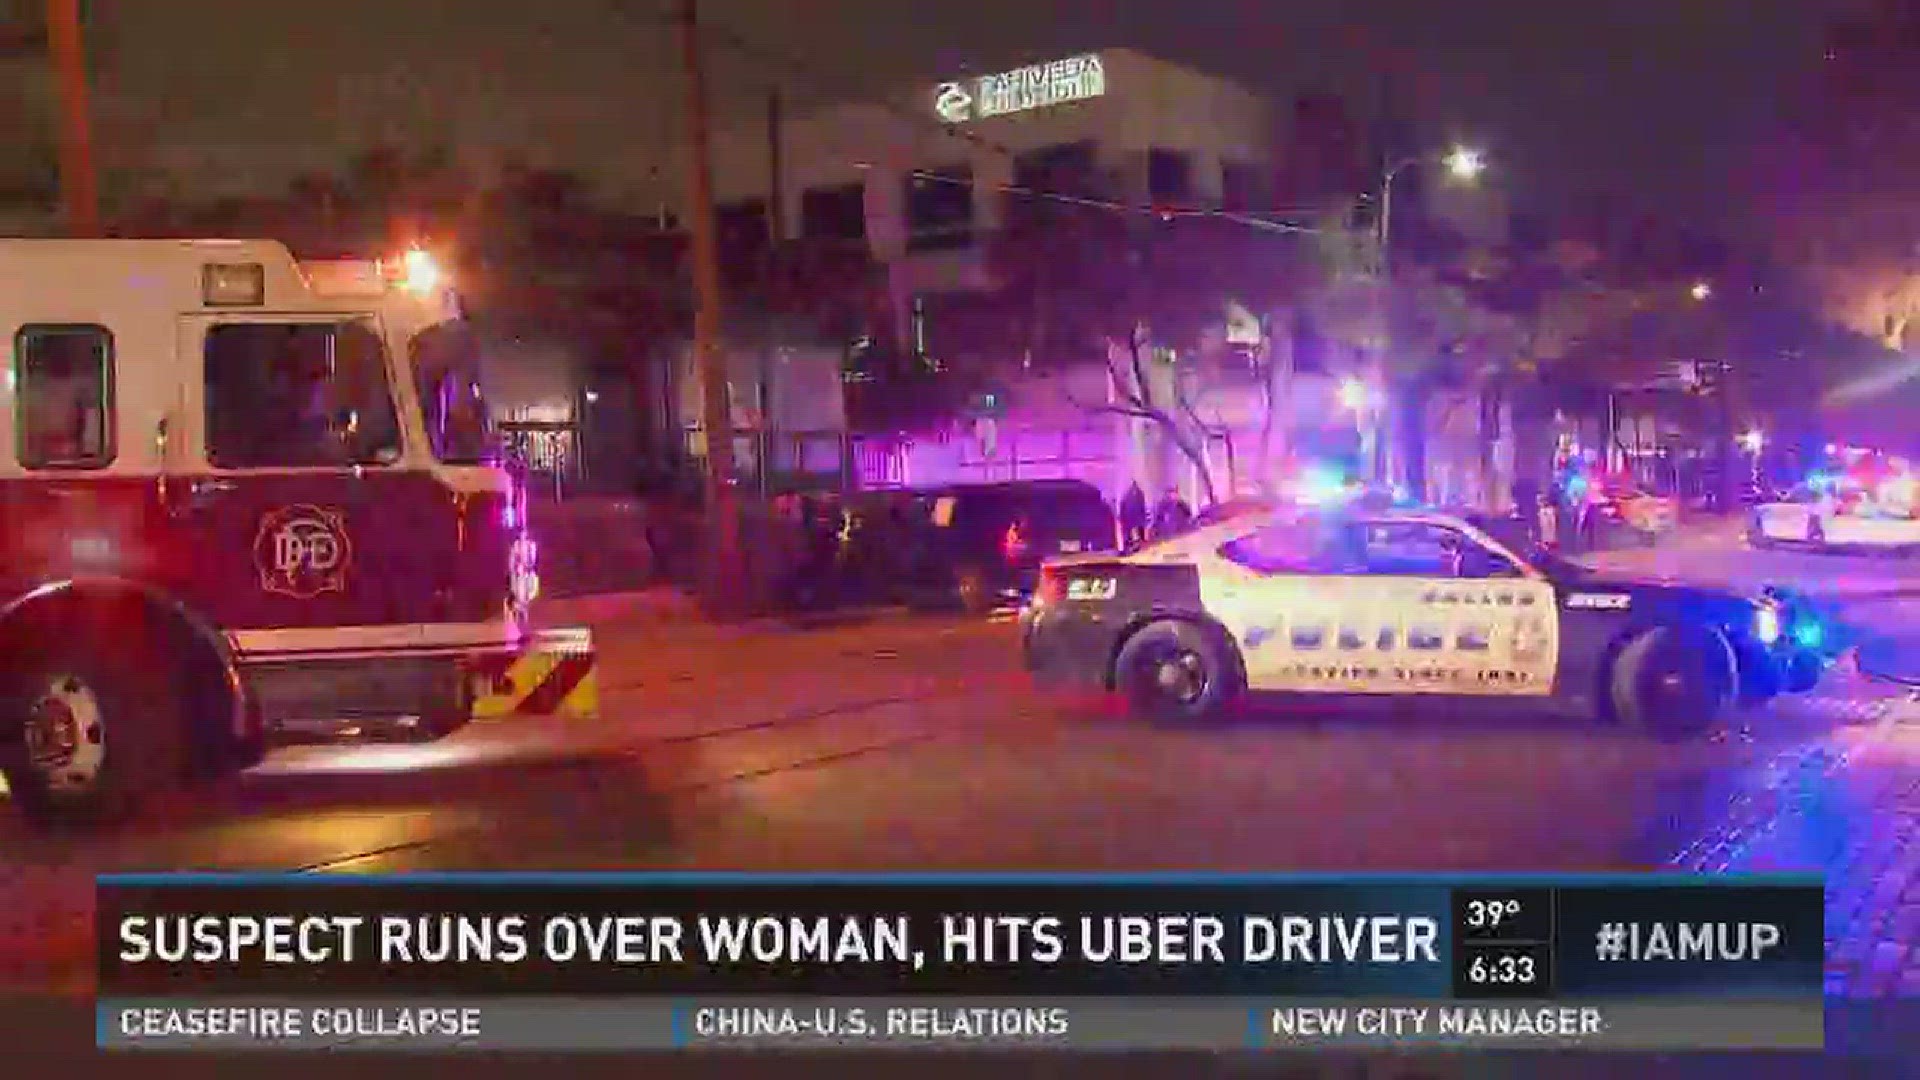 Suspect runs over woman, hits Uber driver